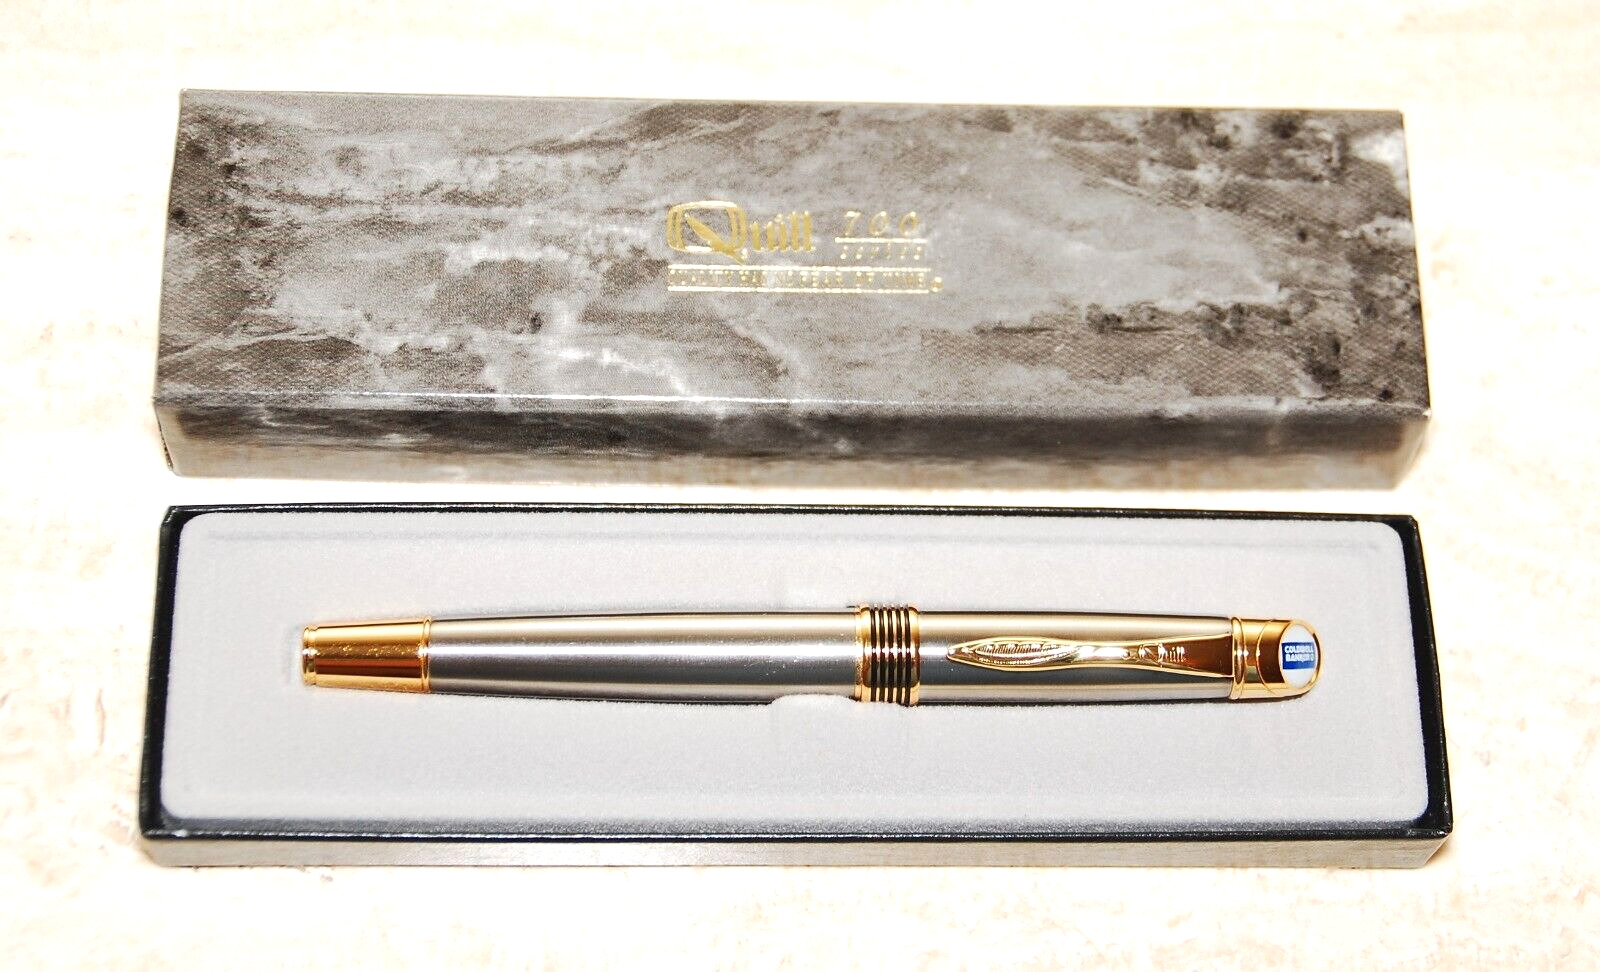 VINTAGE QUILL 700 SERIES PEN - COLDWELL BANKER - MINT CONDITION